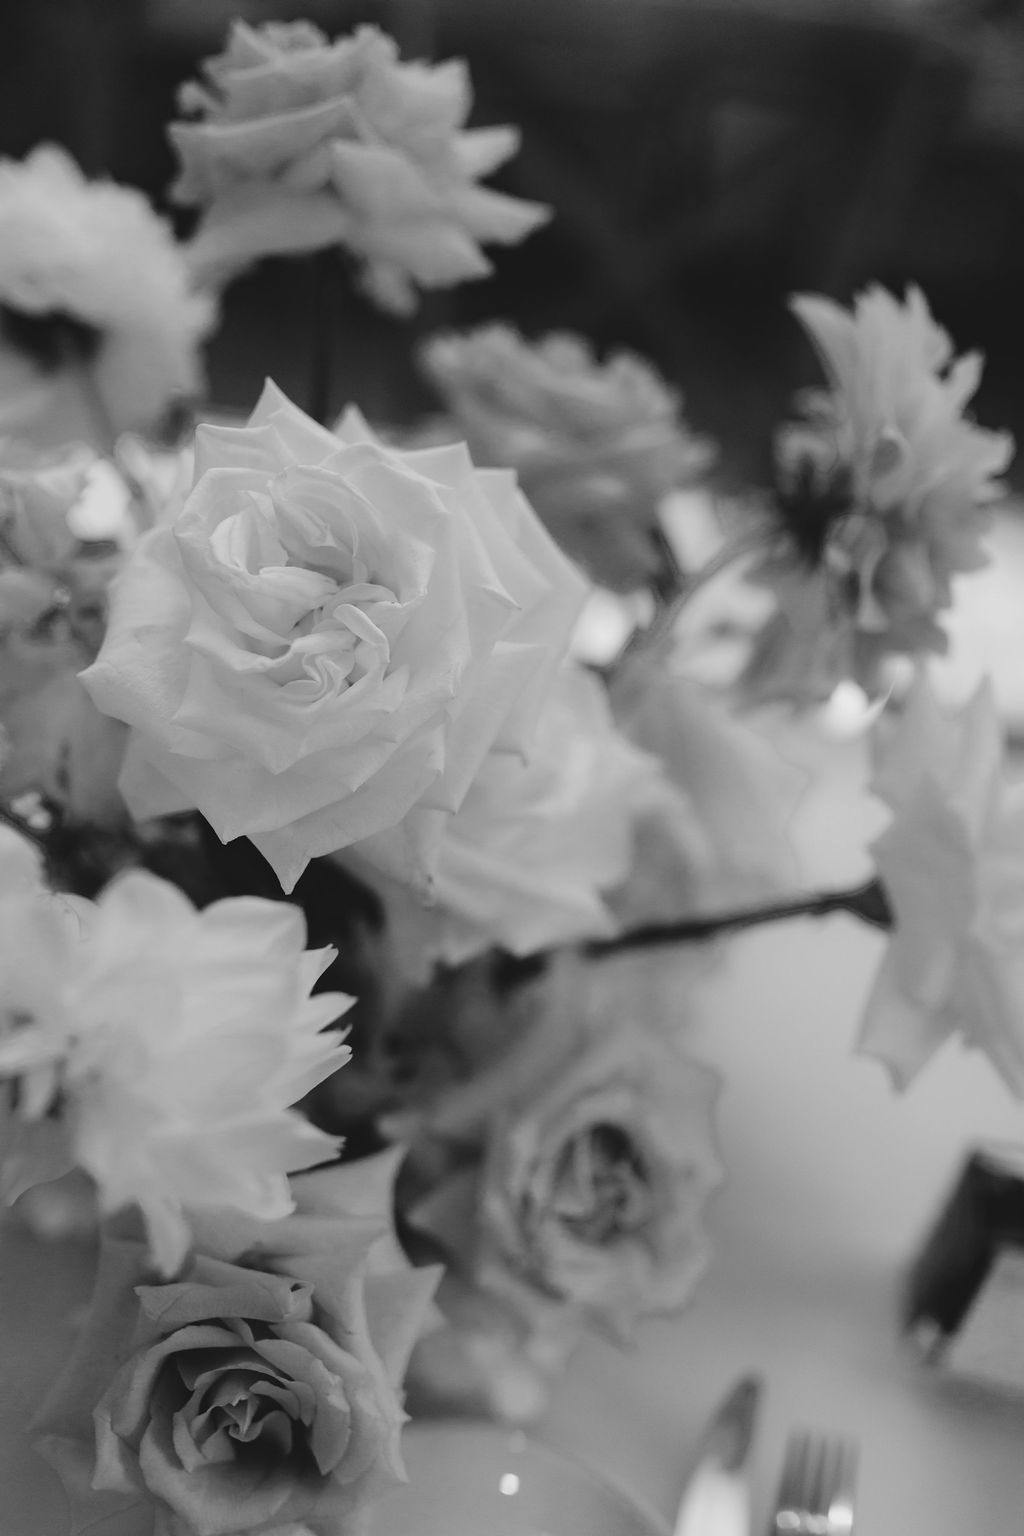 Black and white image of a bouquet of roses and other flowers on a table, with blurred background. The flowers are in various stages of bloom, creating a classic and elegant arrangement. Cutlery and part of a plate are visible in the foreground.